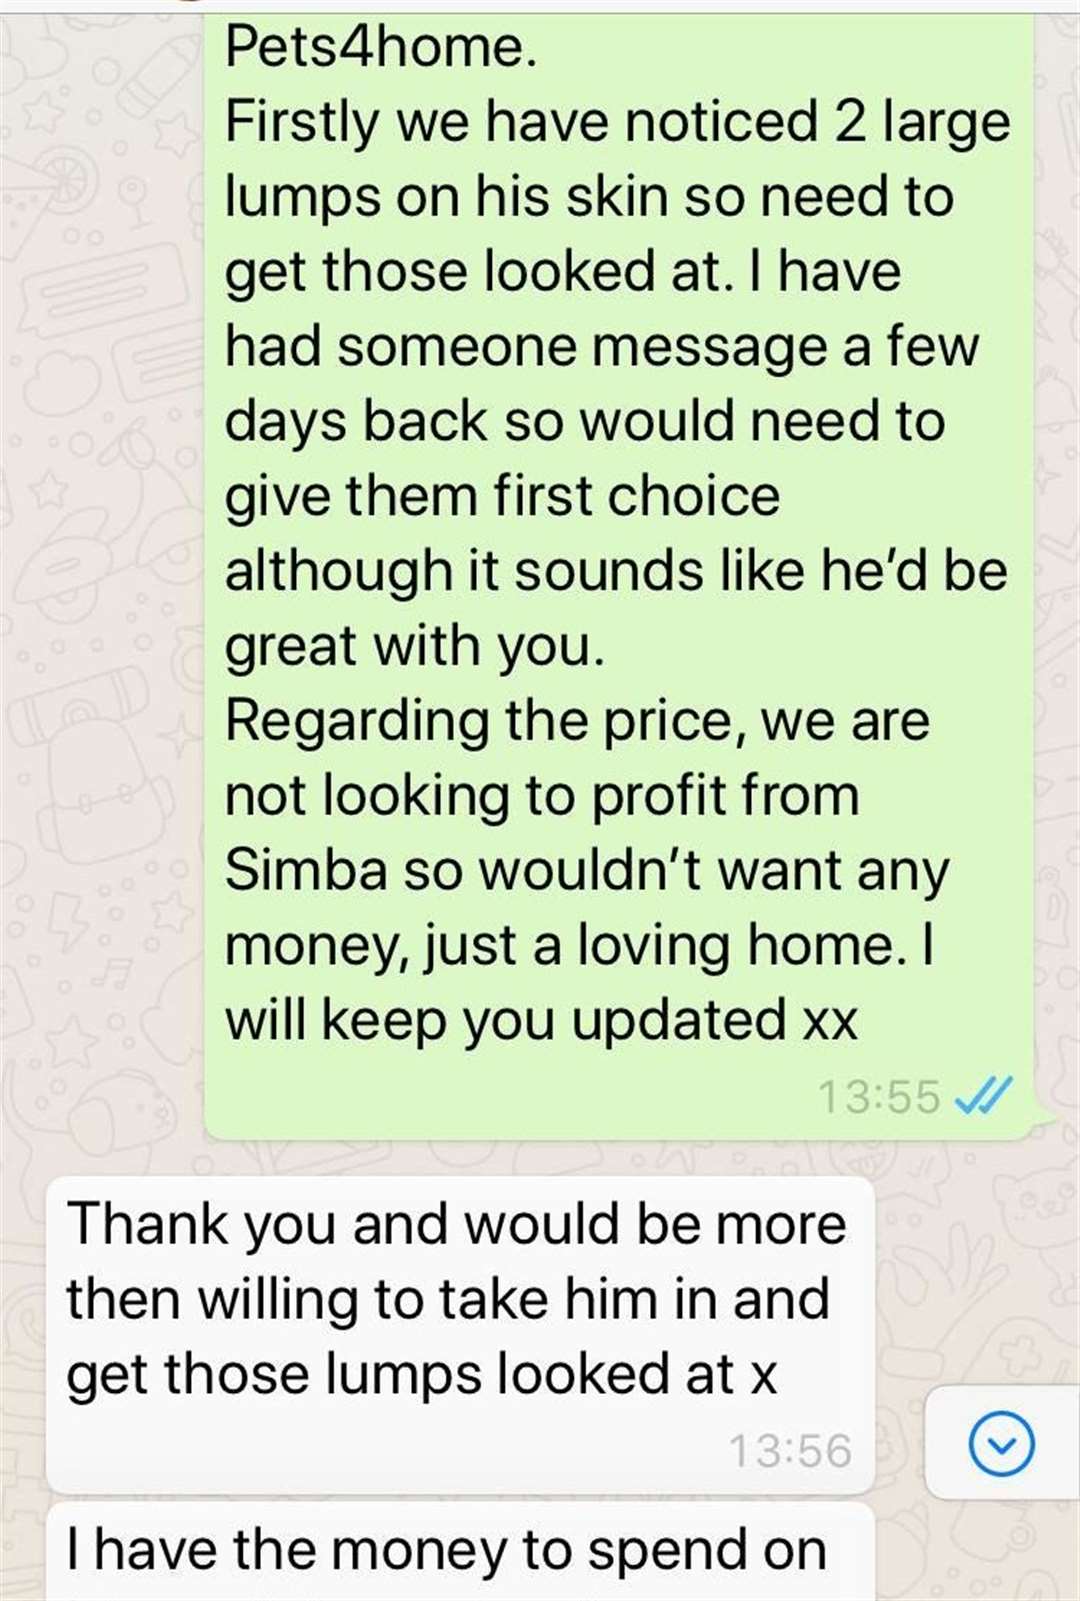 Text messages between the owner of Simba (green) and the teen who adopted him